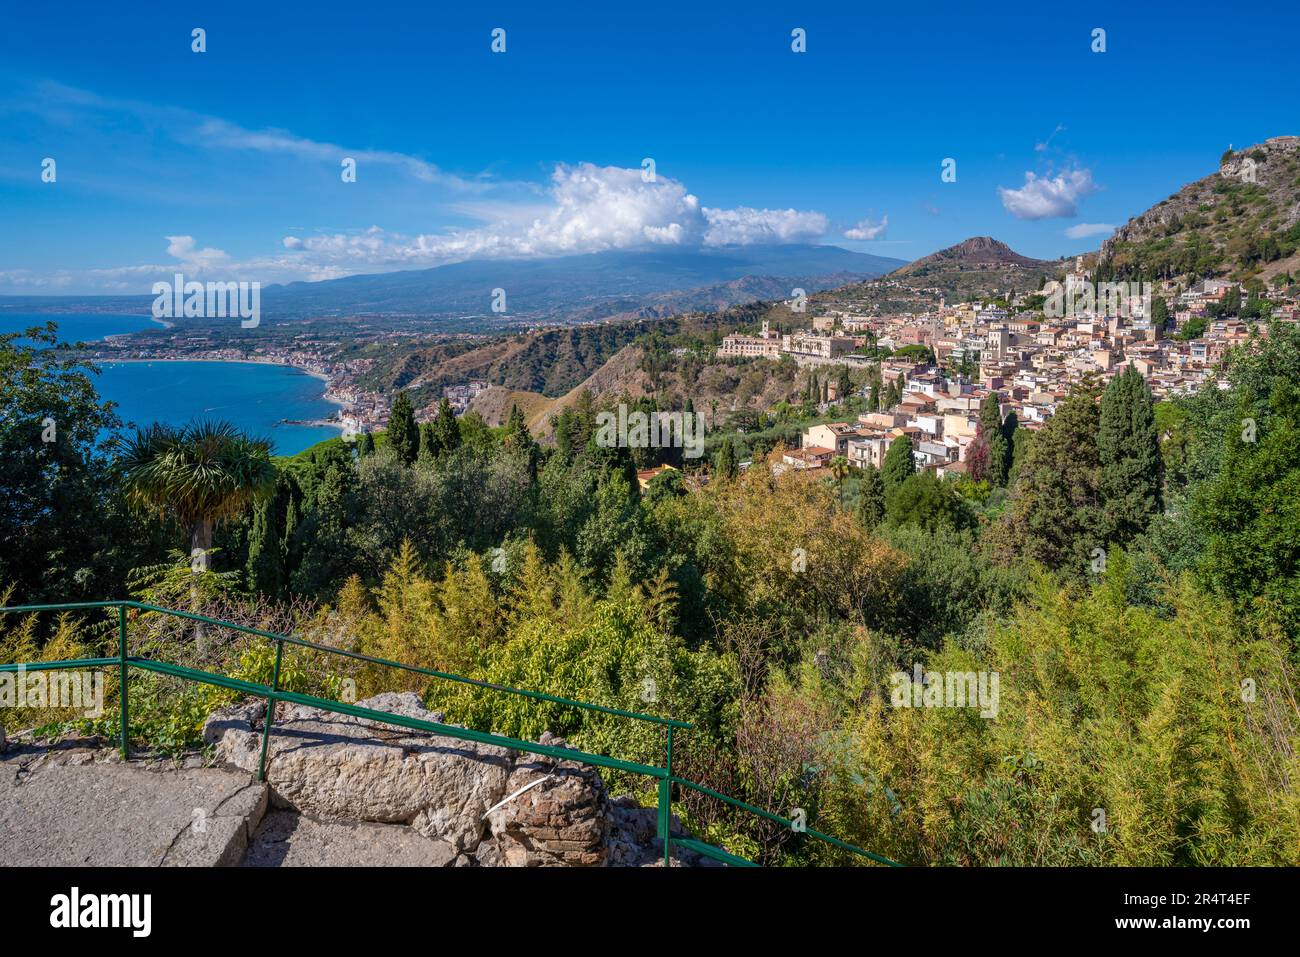 View of Taormina and Mount Etna from the Greek Theatre, Taormina, Sicily, Italy, Europe Stock Photo